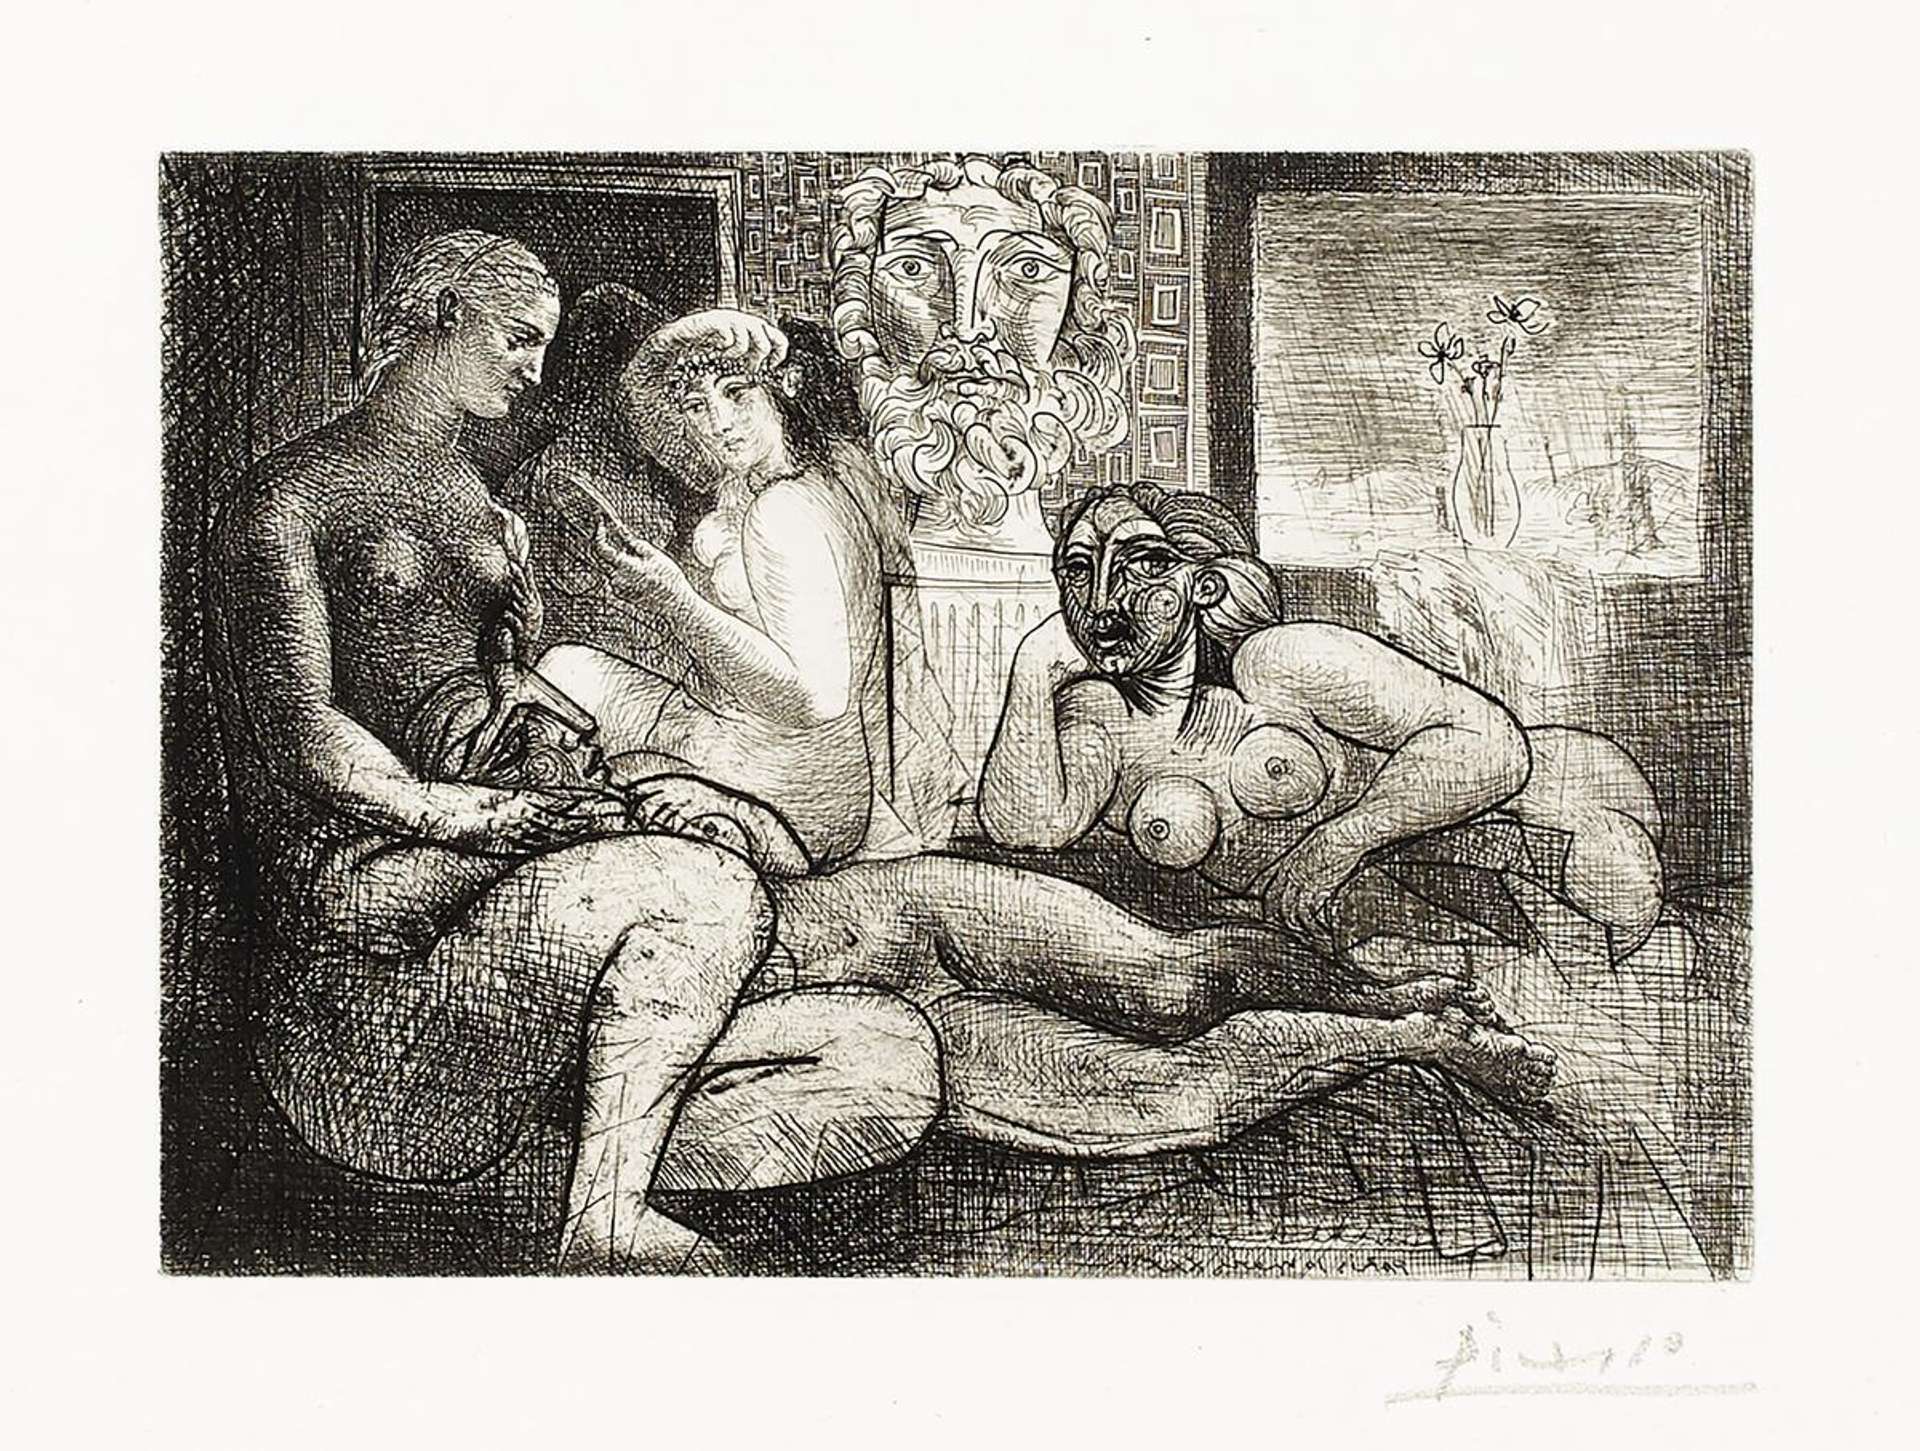 In this etching by Picasso, four nude female figures are seen in a domestic interior. In the back, a large male bust can be seen.